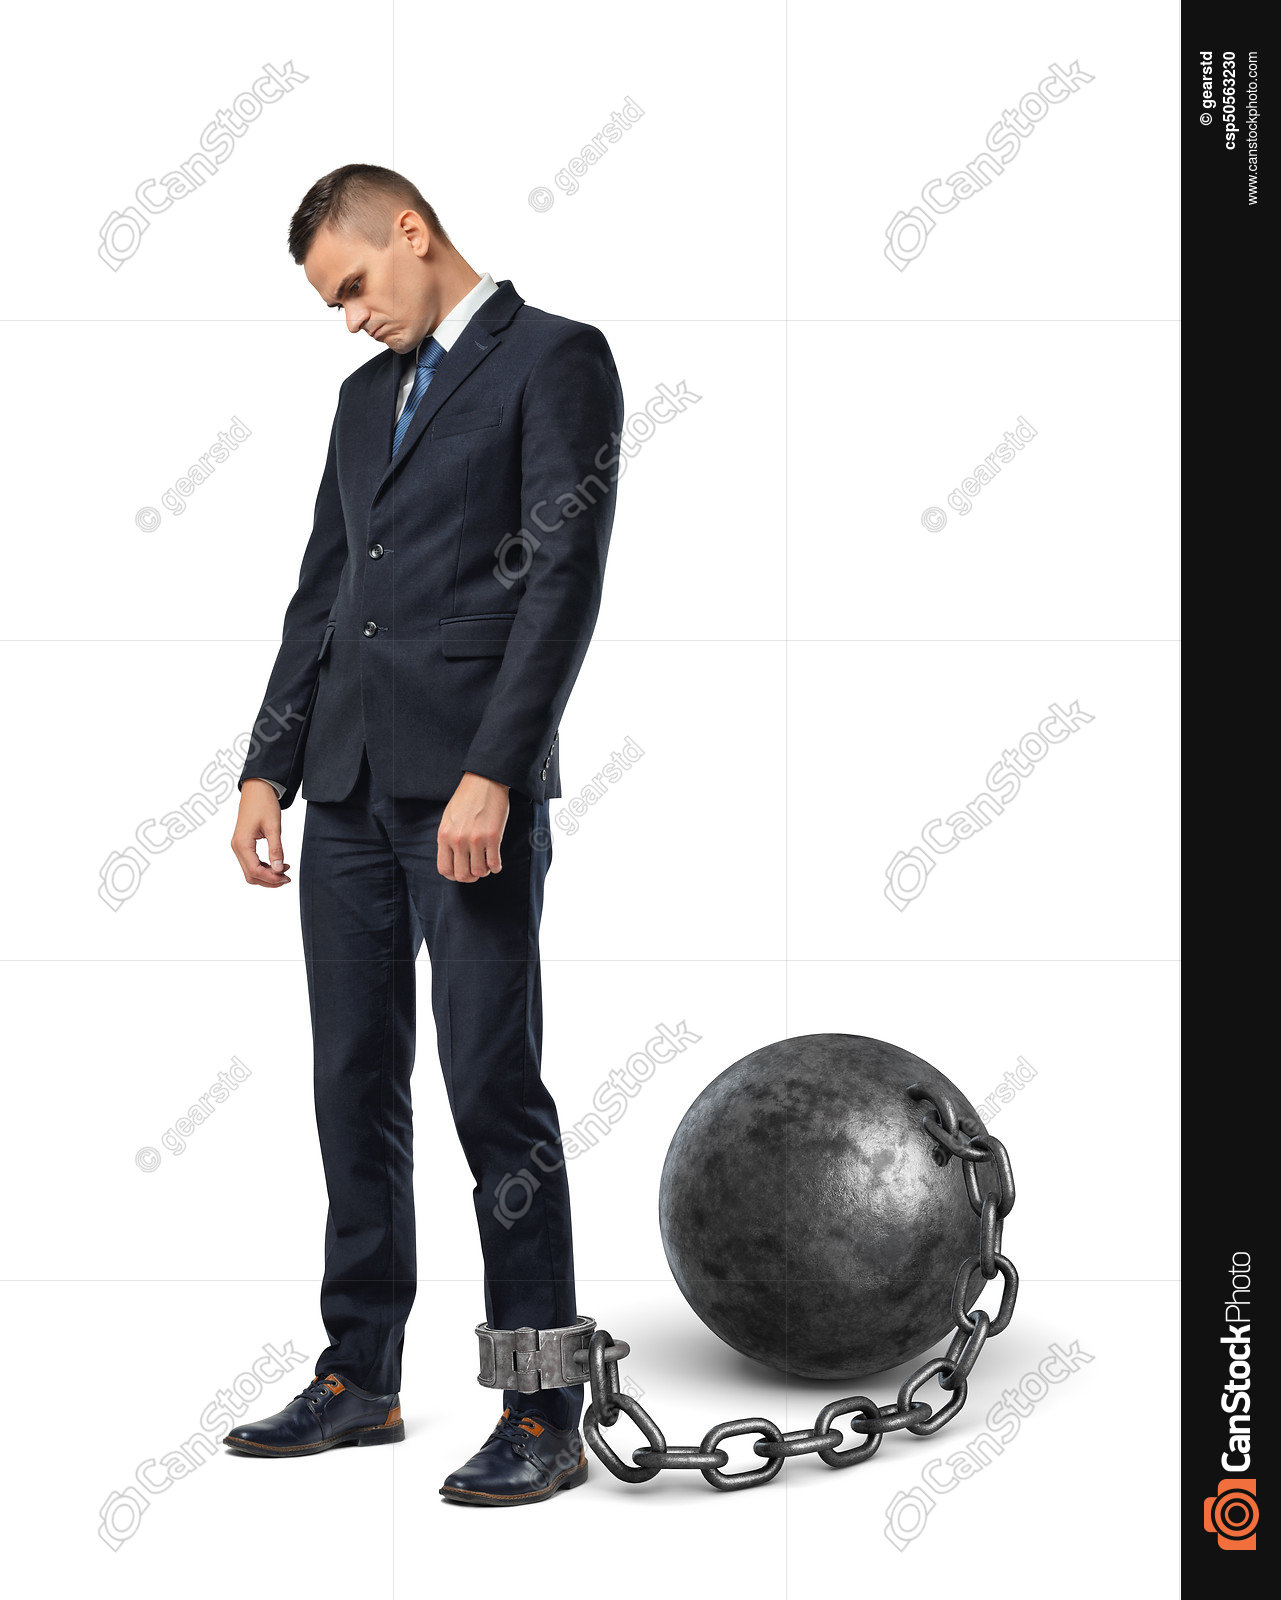 A sad businessman looks down while shackled to a large iron... stock ...